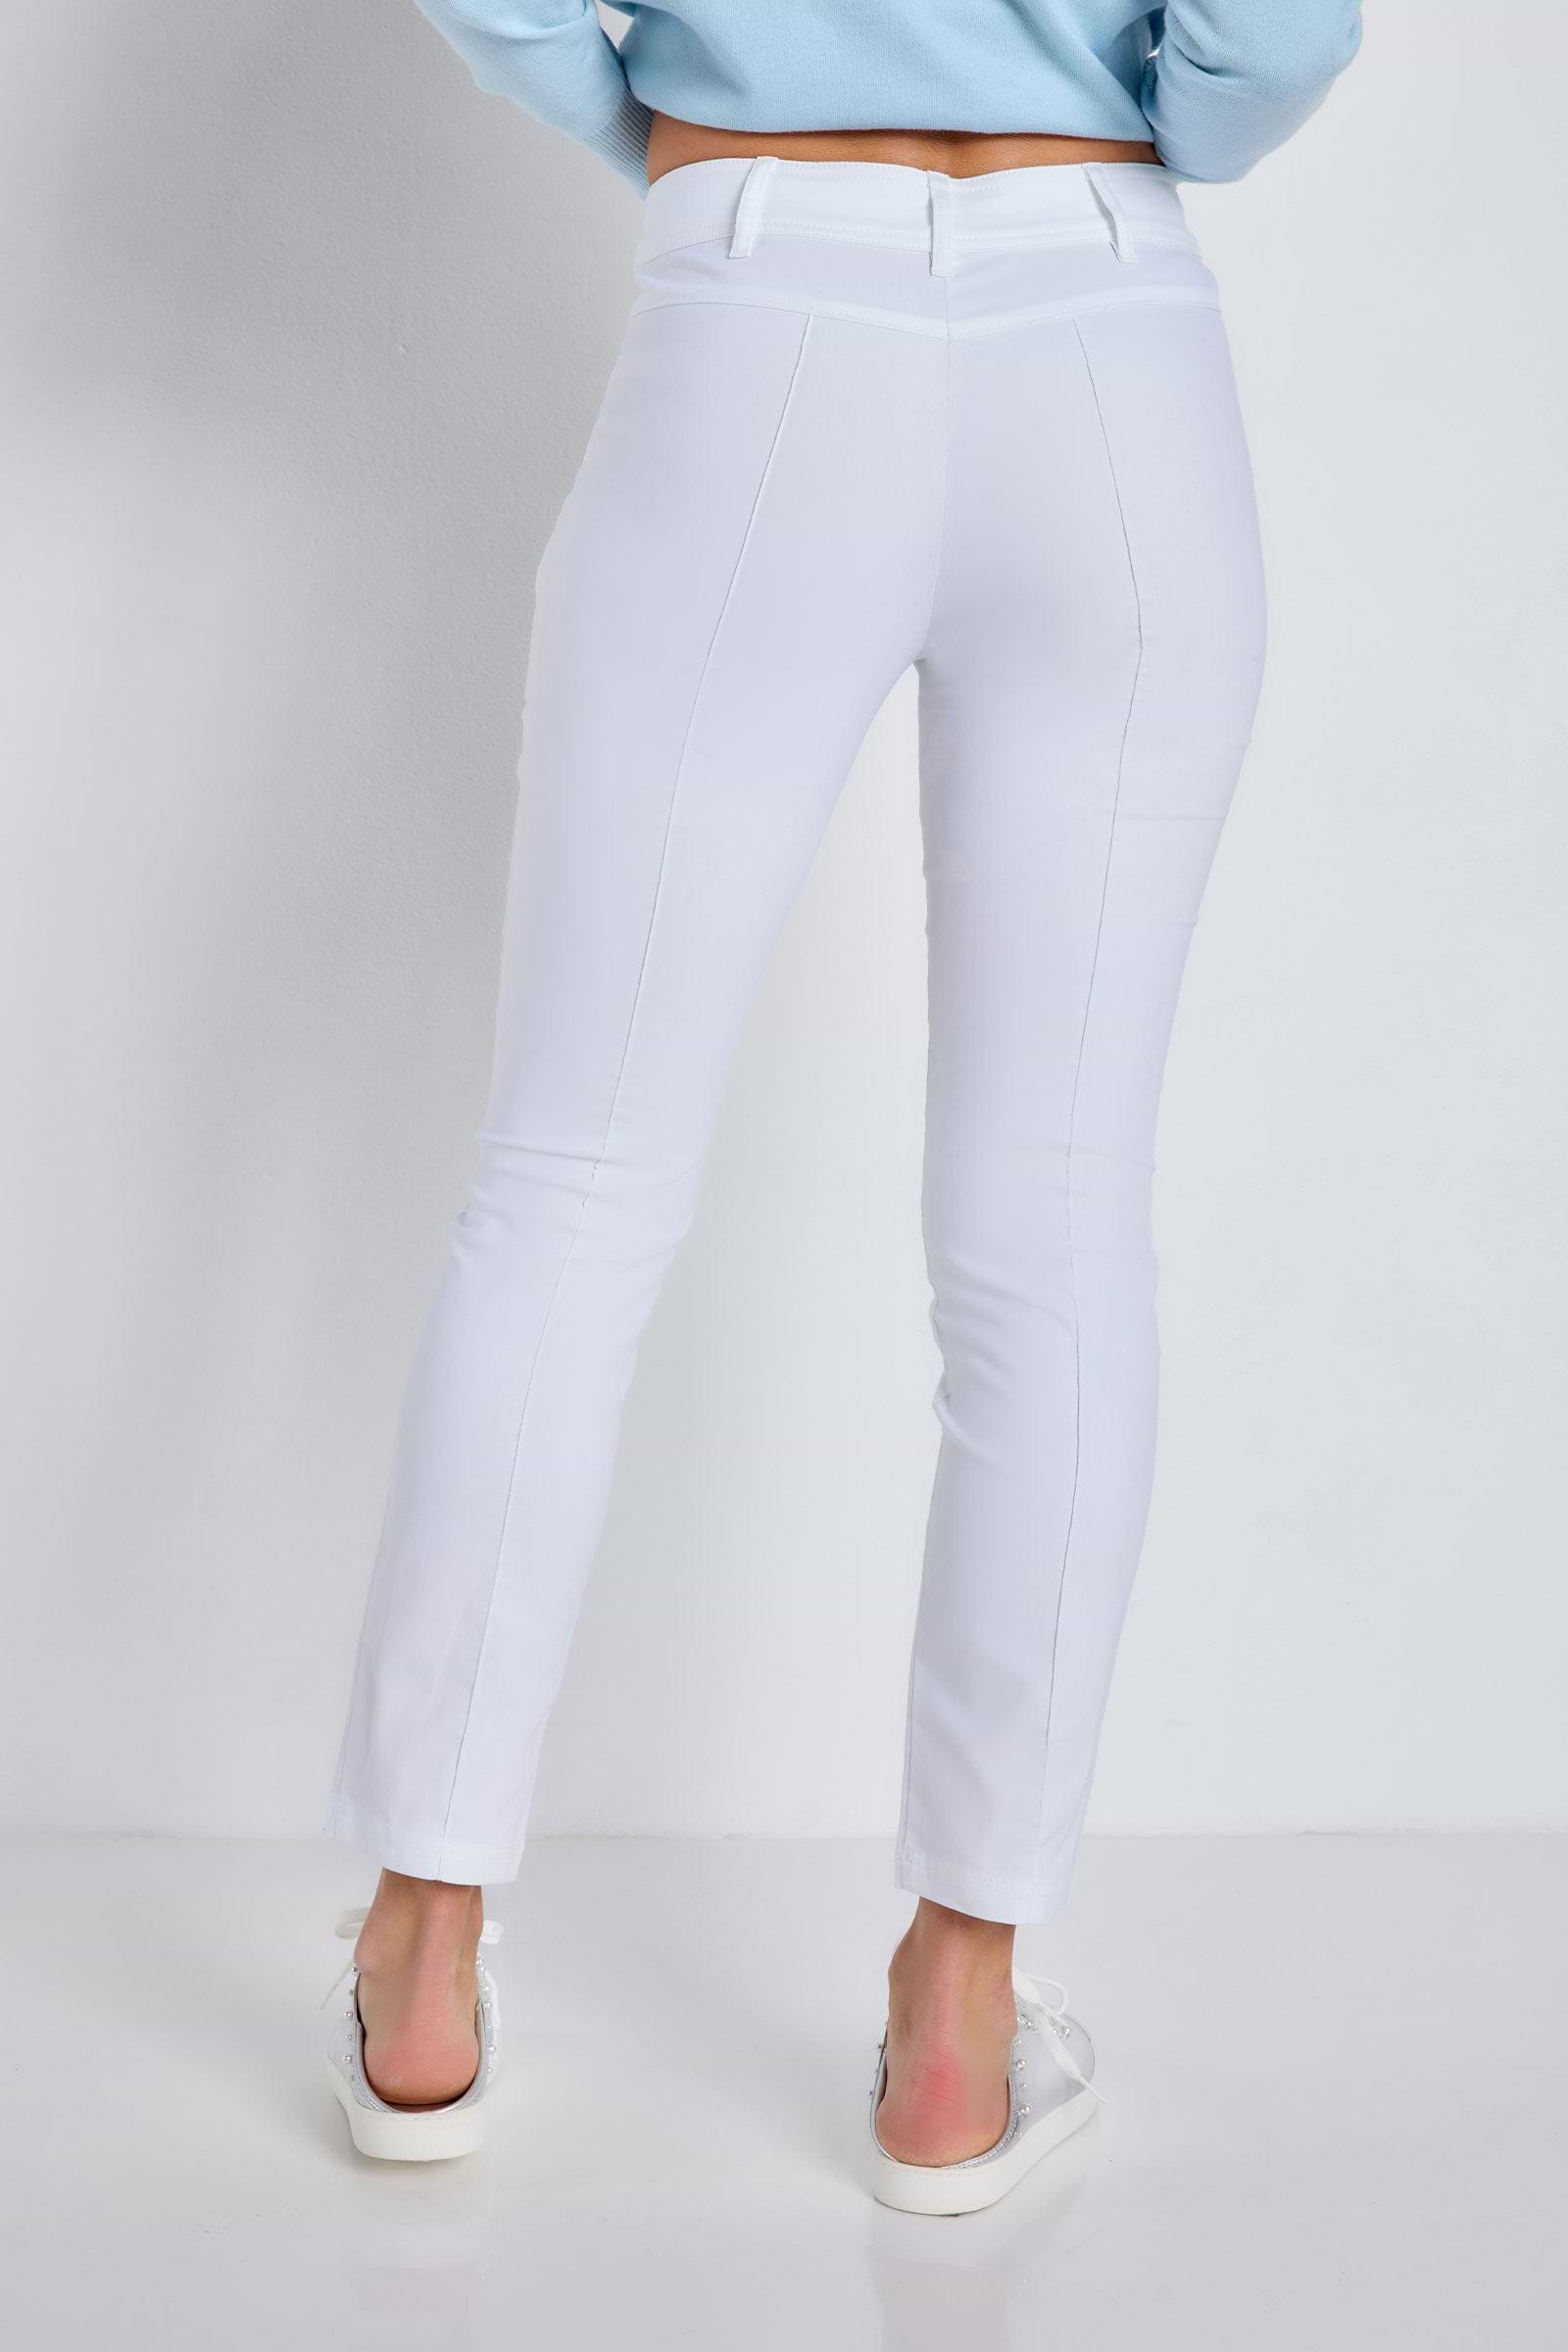 The Best Travel Pants. Back Profile of the Peggy Zippered Pant in White